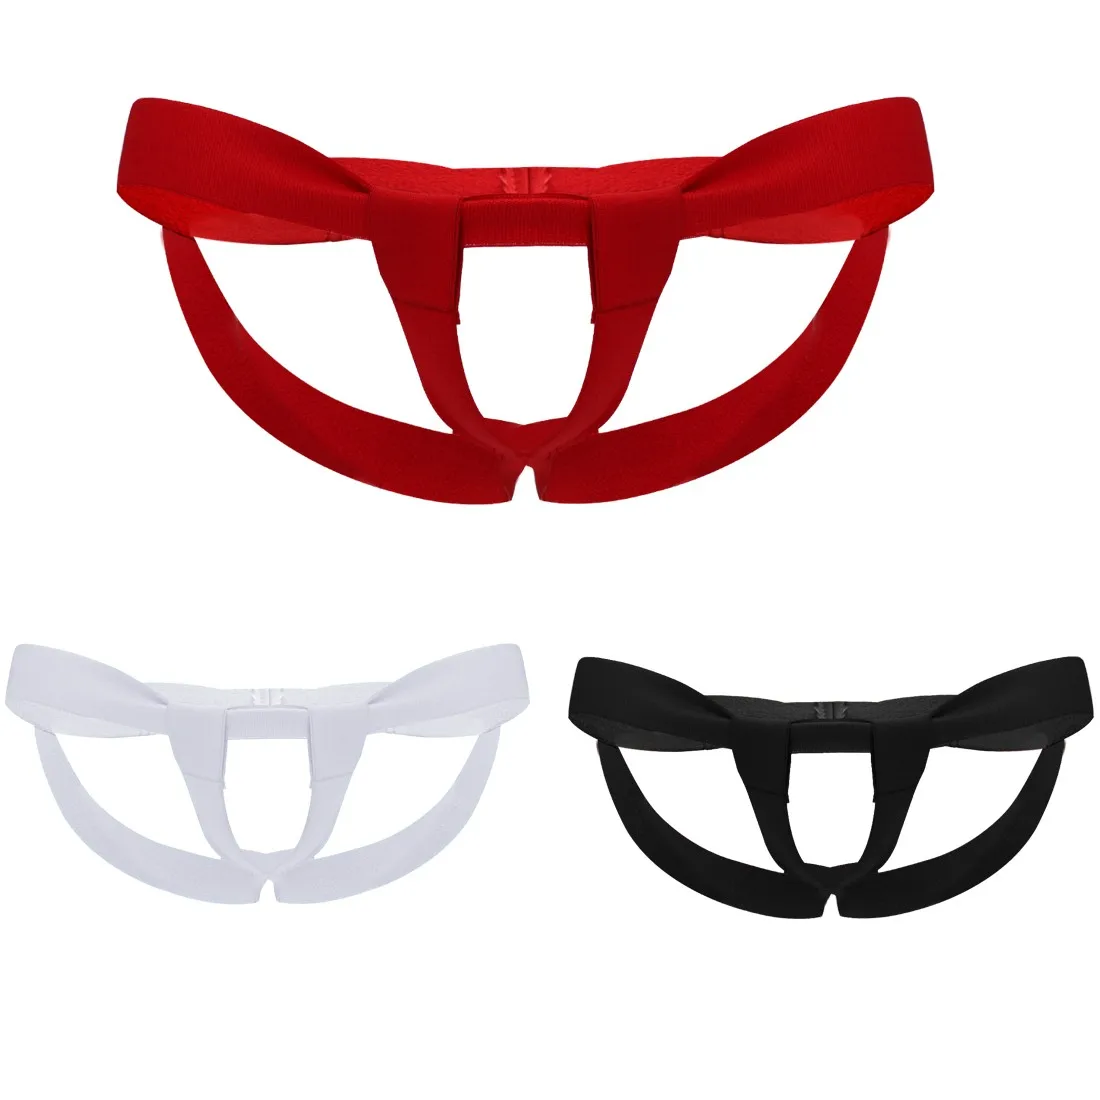 Man Bandage G-string Underwear with Enhancing Strap Open Crotch and Butt Elastic Waistband Hallow Out Thong Underpants white knee high stockings